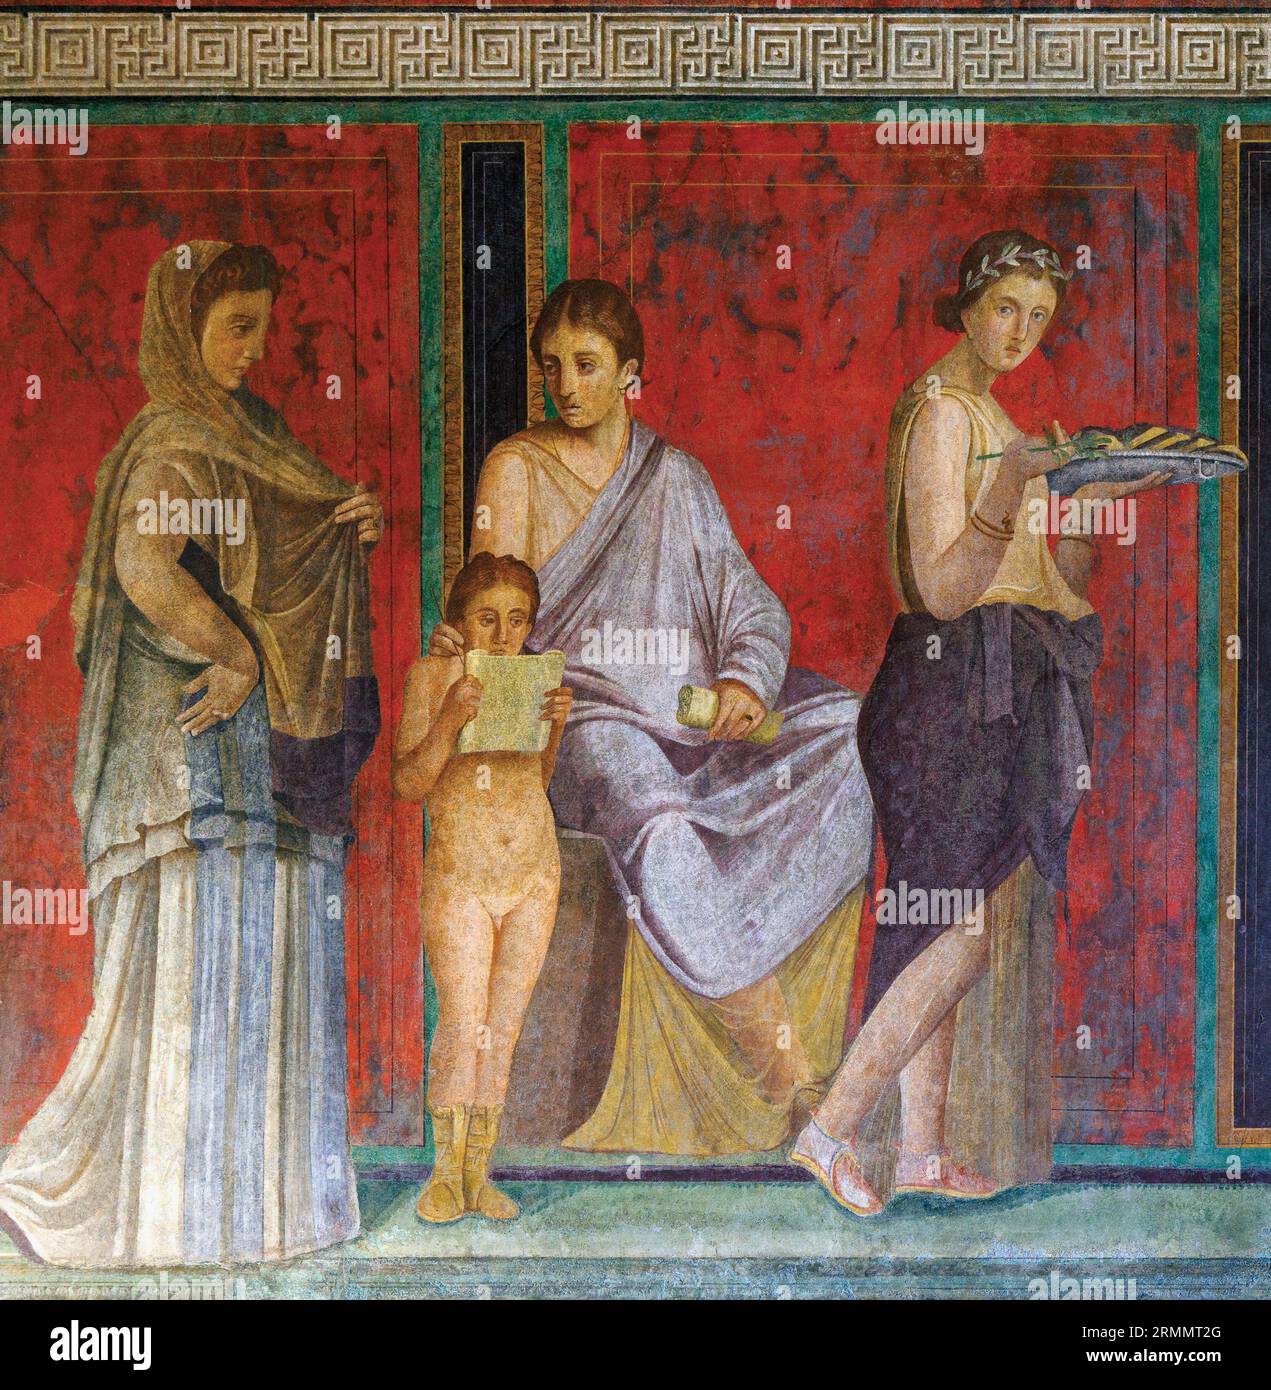 Pompeii Archaeological Site, Campania, Italy.  The reading of the liturgy of the ritual and, to the right, a pregnant woman offers sacred cakes. Detai Stock Photo